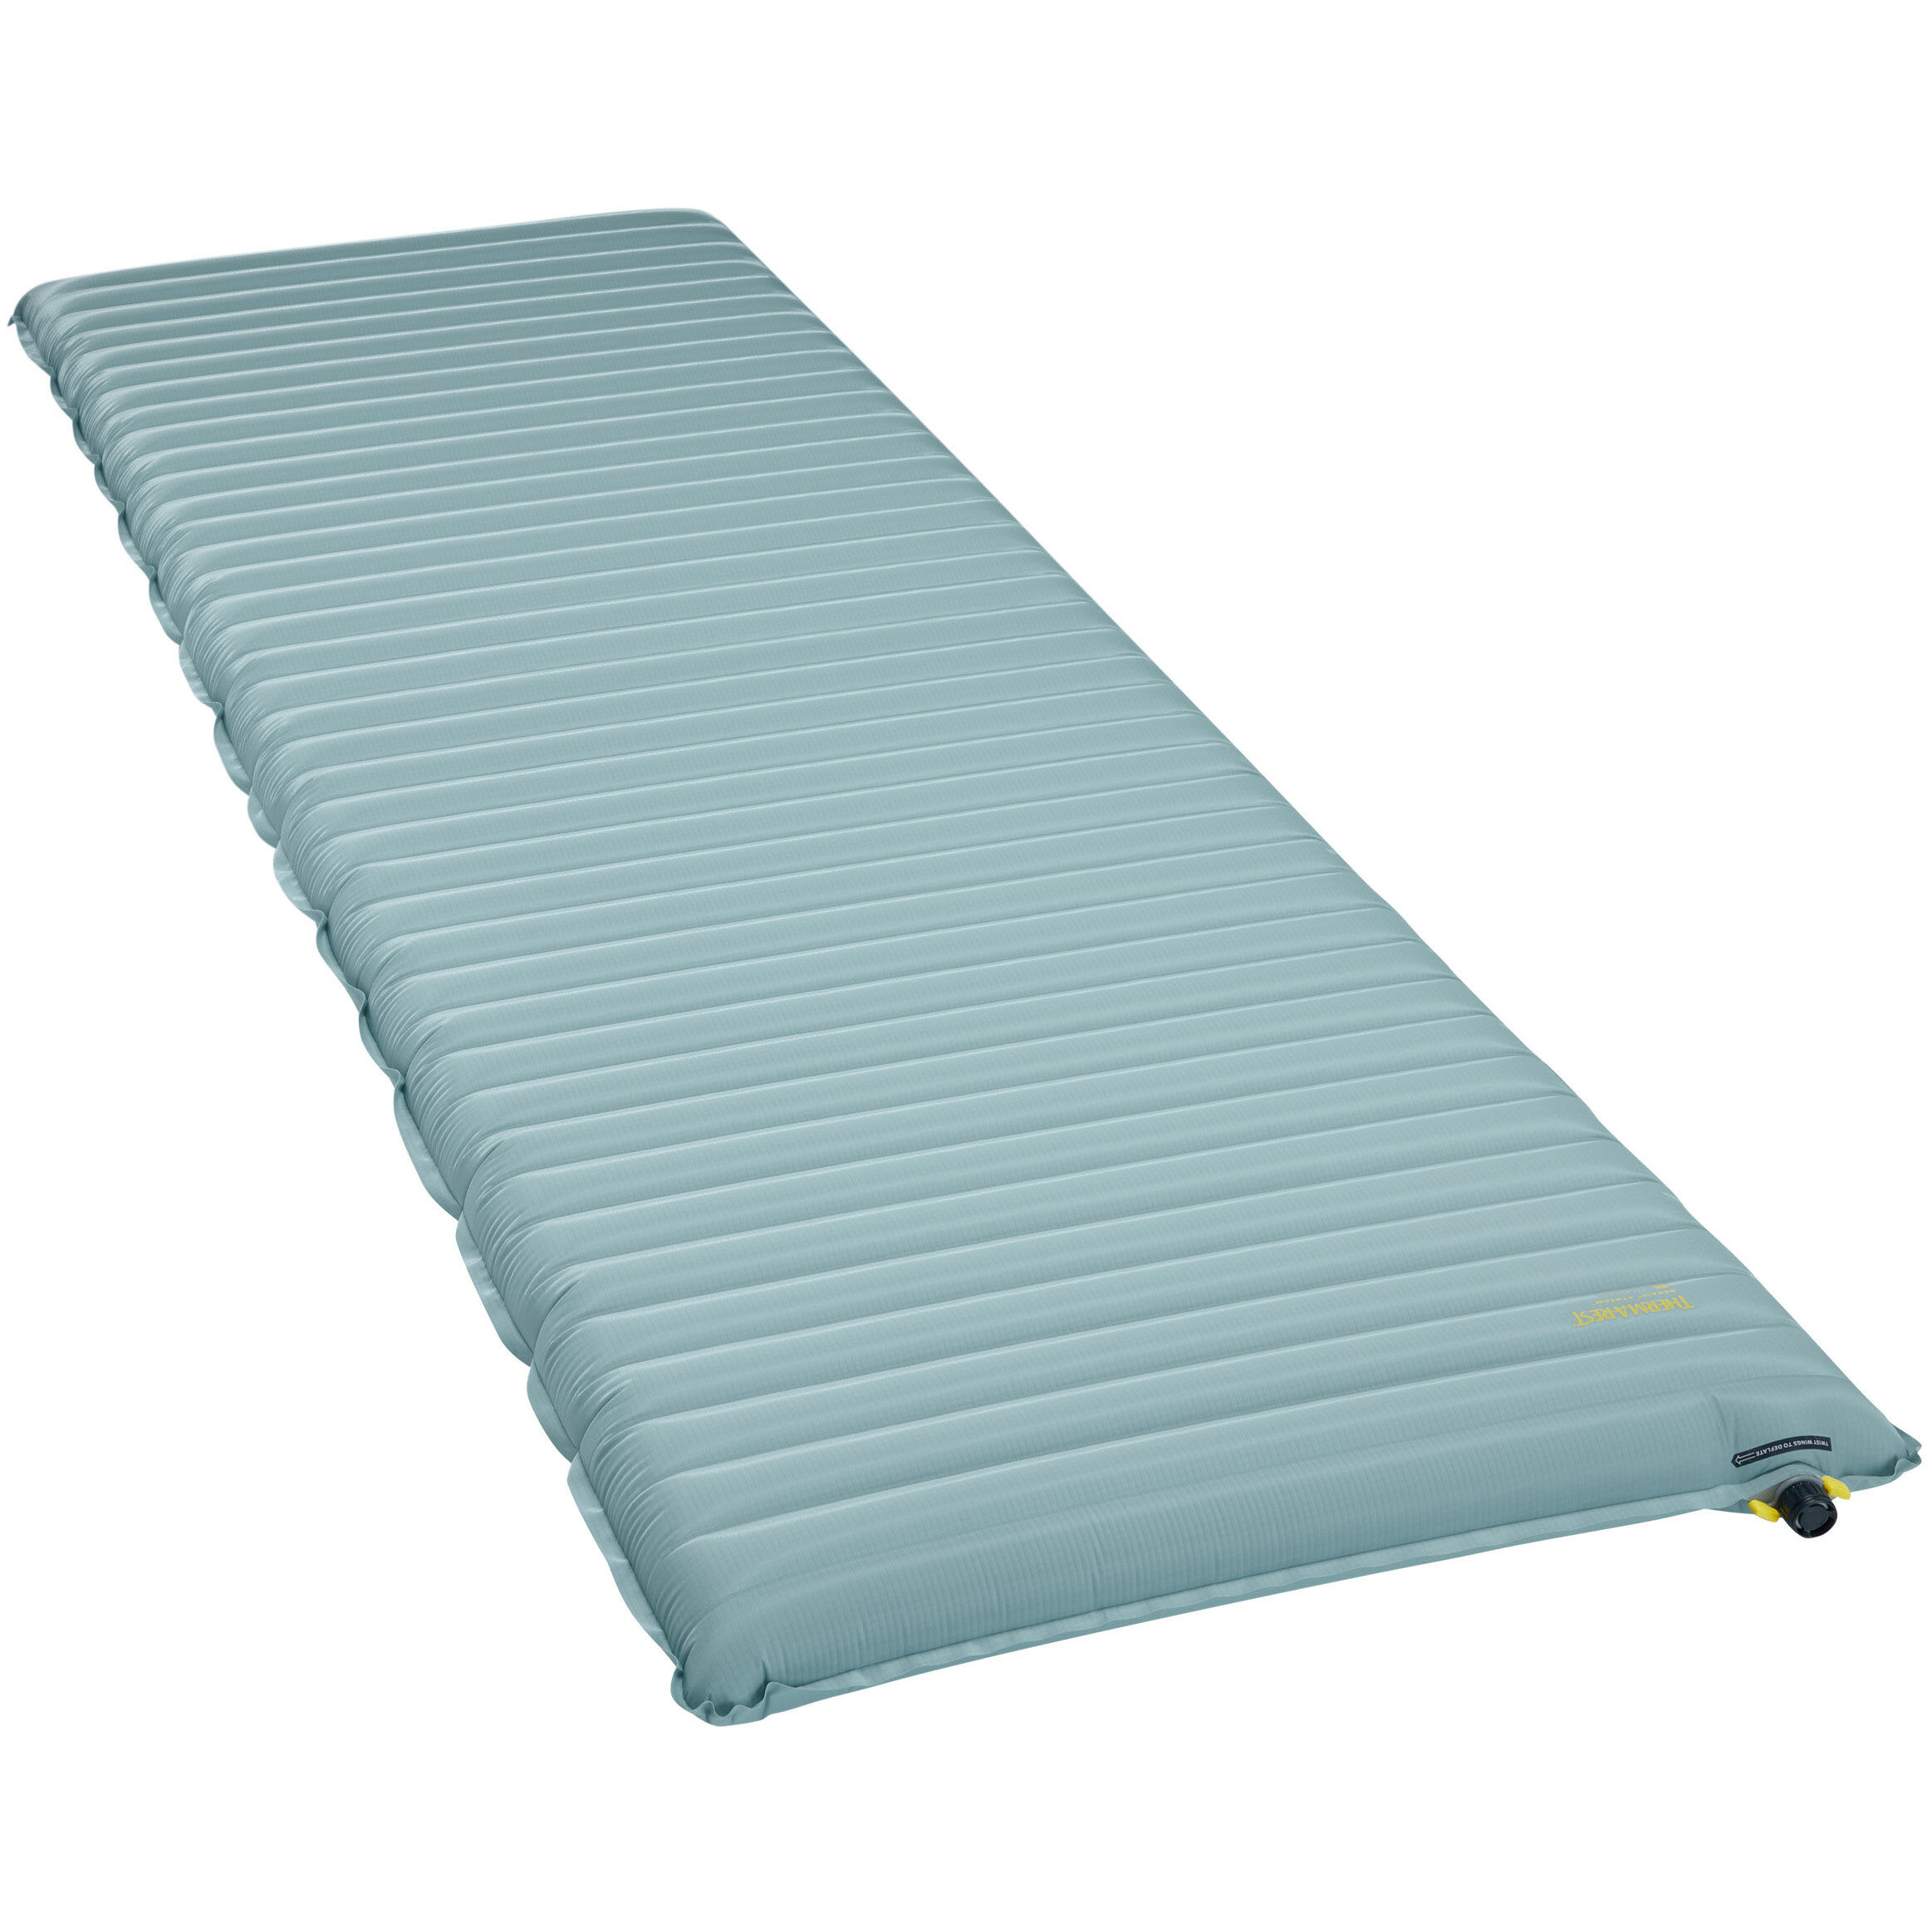 thermarest - search results | MSRTherm-a-Rest